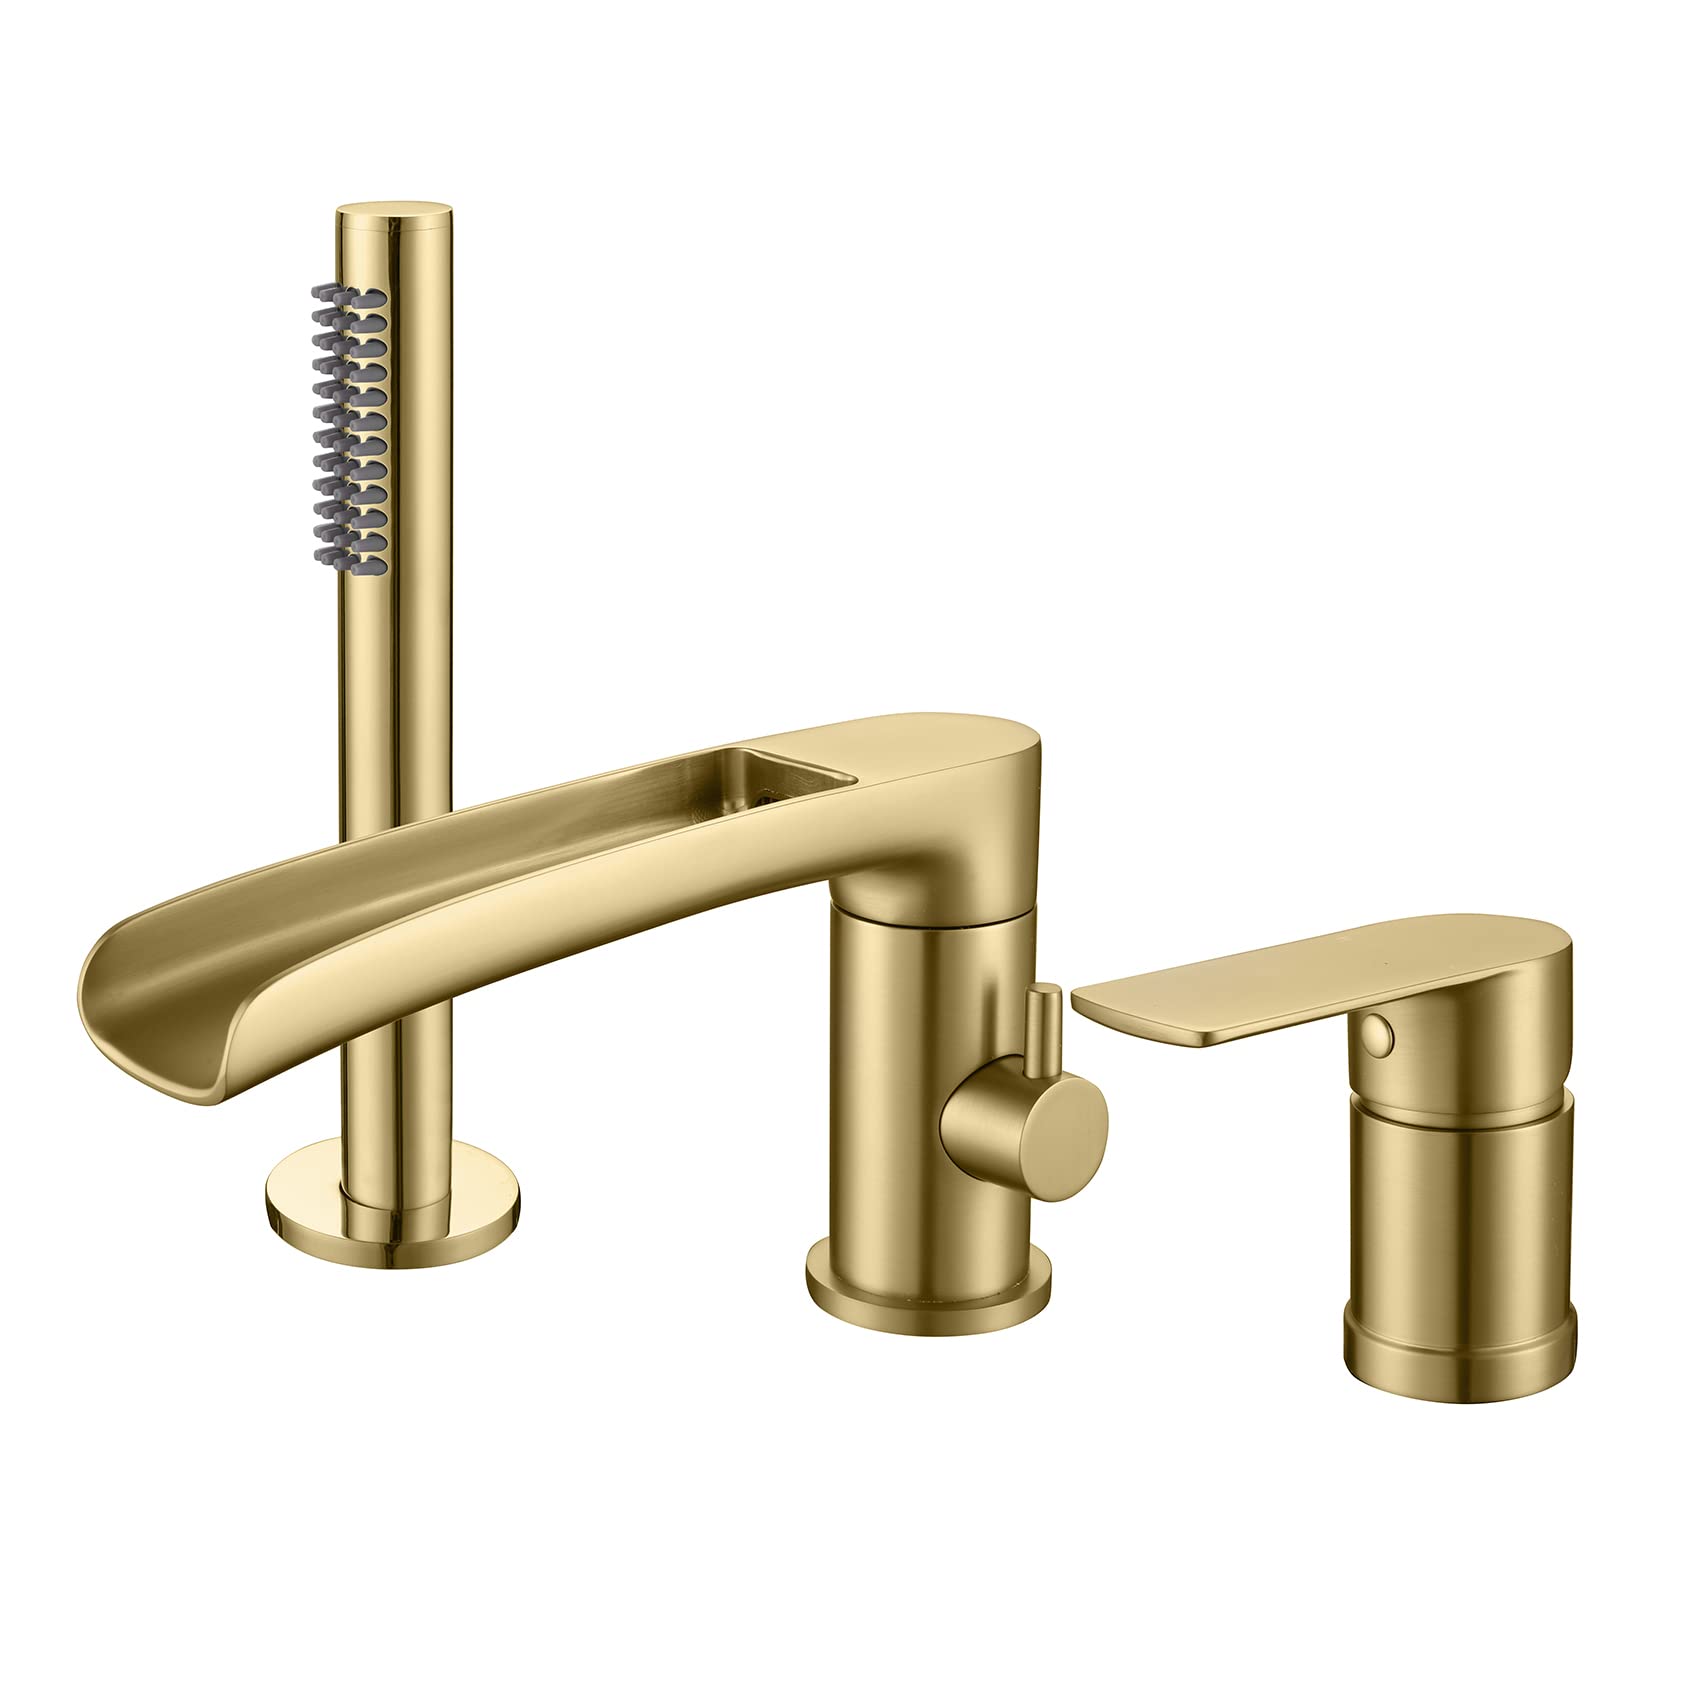 TapLong Waterfall Roman Tub Faucet with Hand Shower